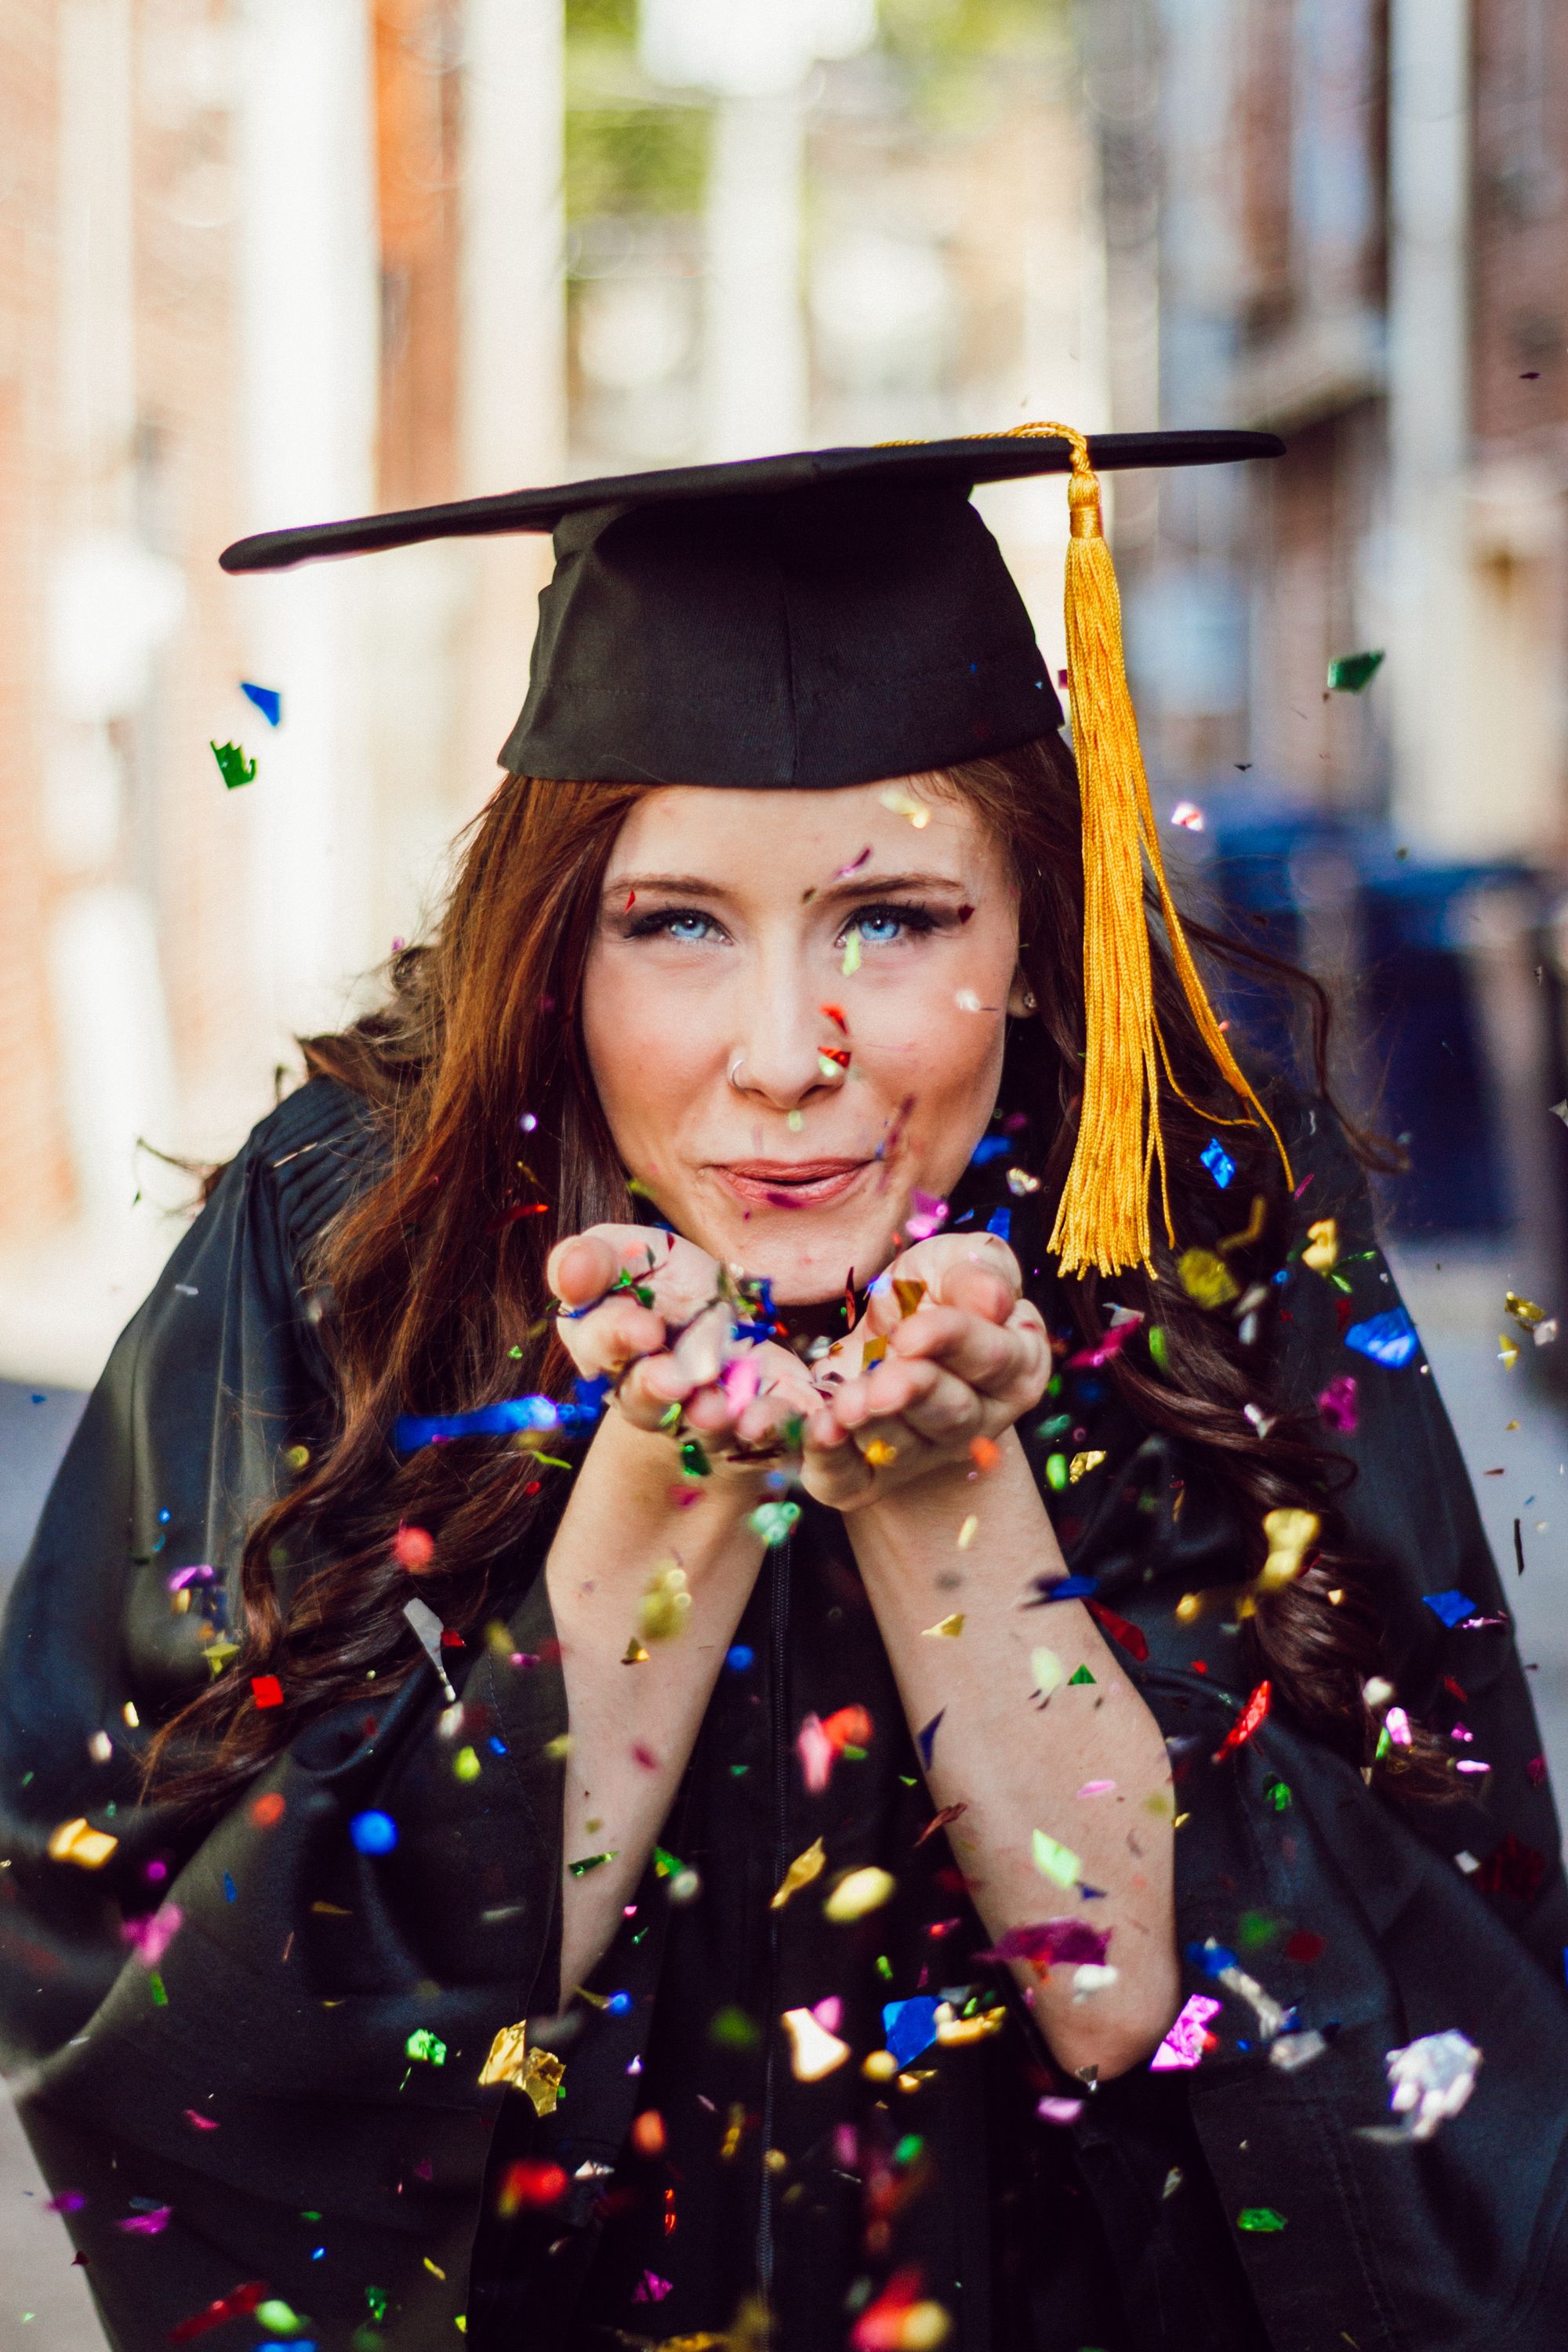 The Best Graduation Gifts for High School Class of 2023